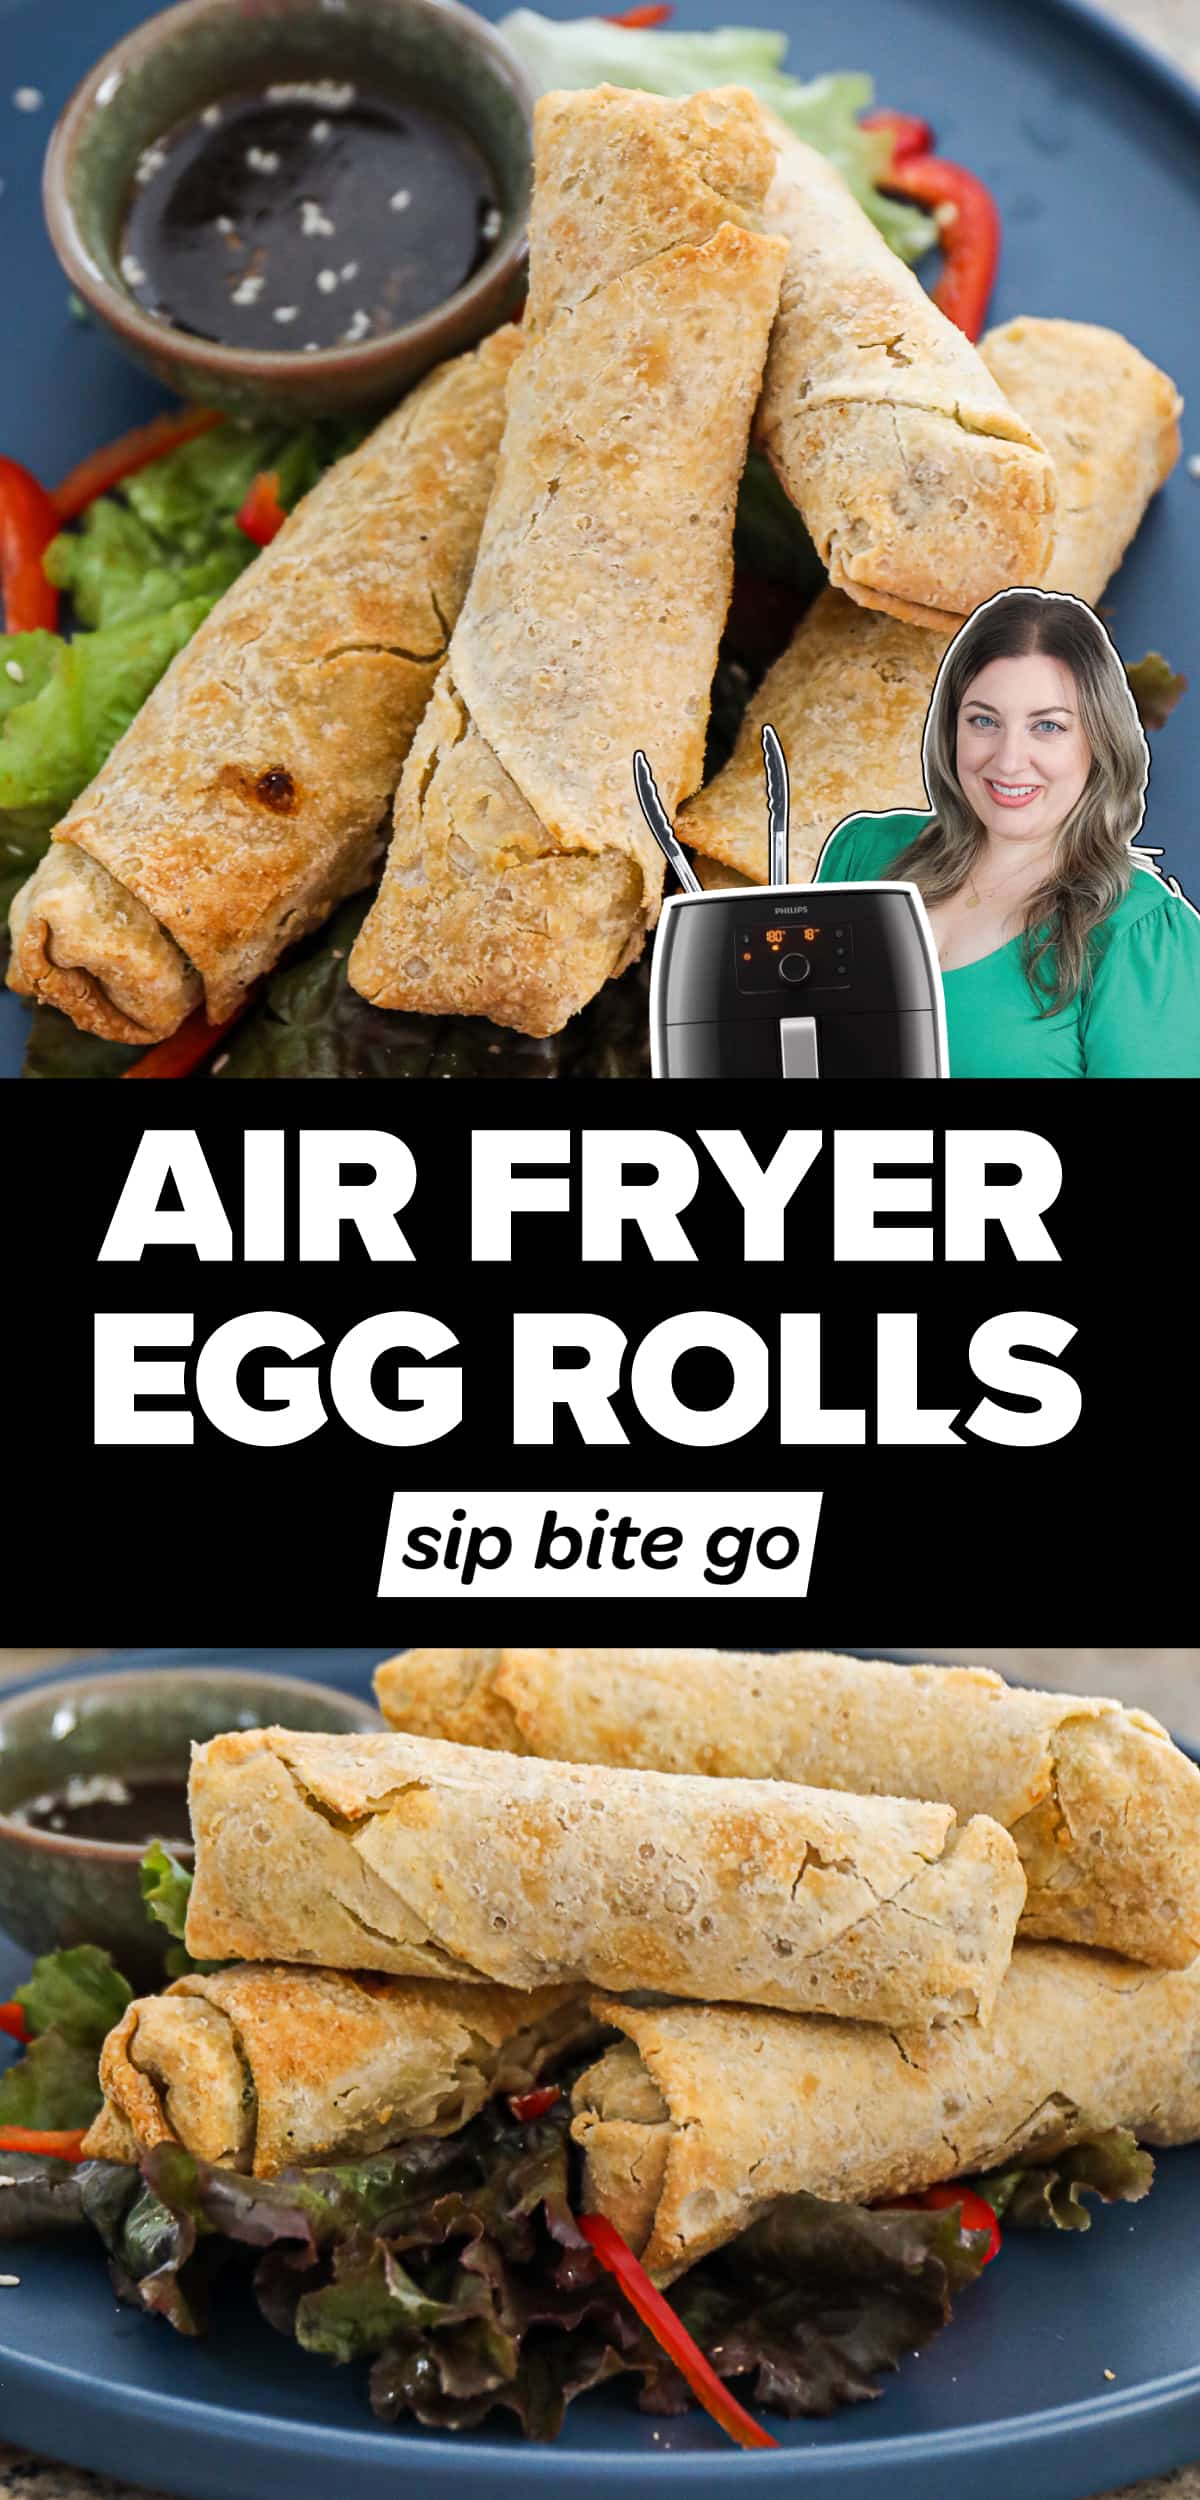 Frozen egg rolls in the air fryer recipe photos with text overlay